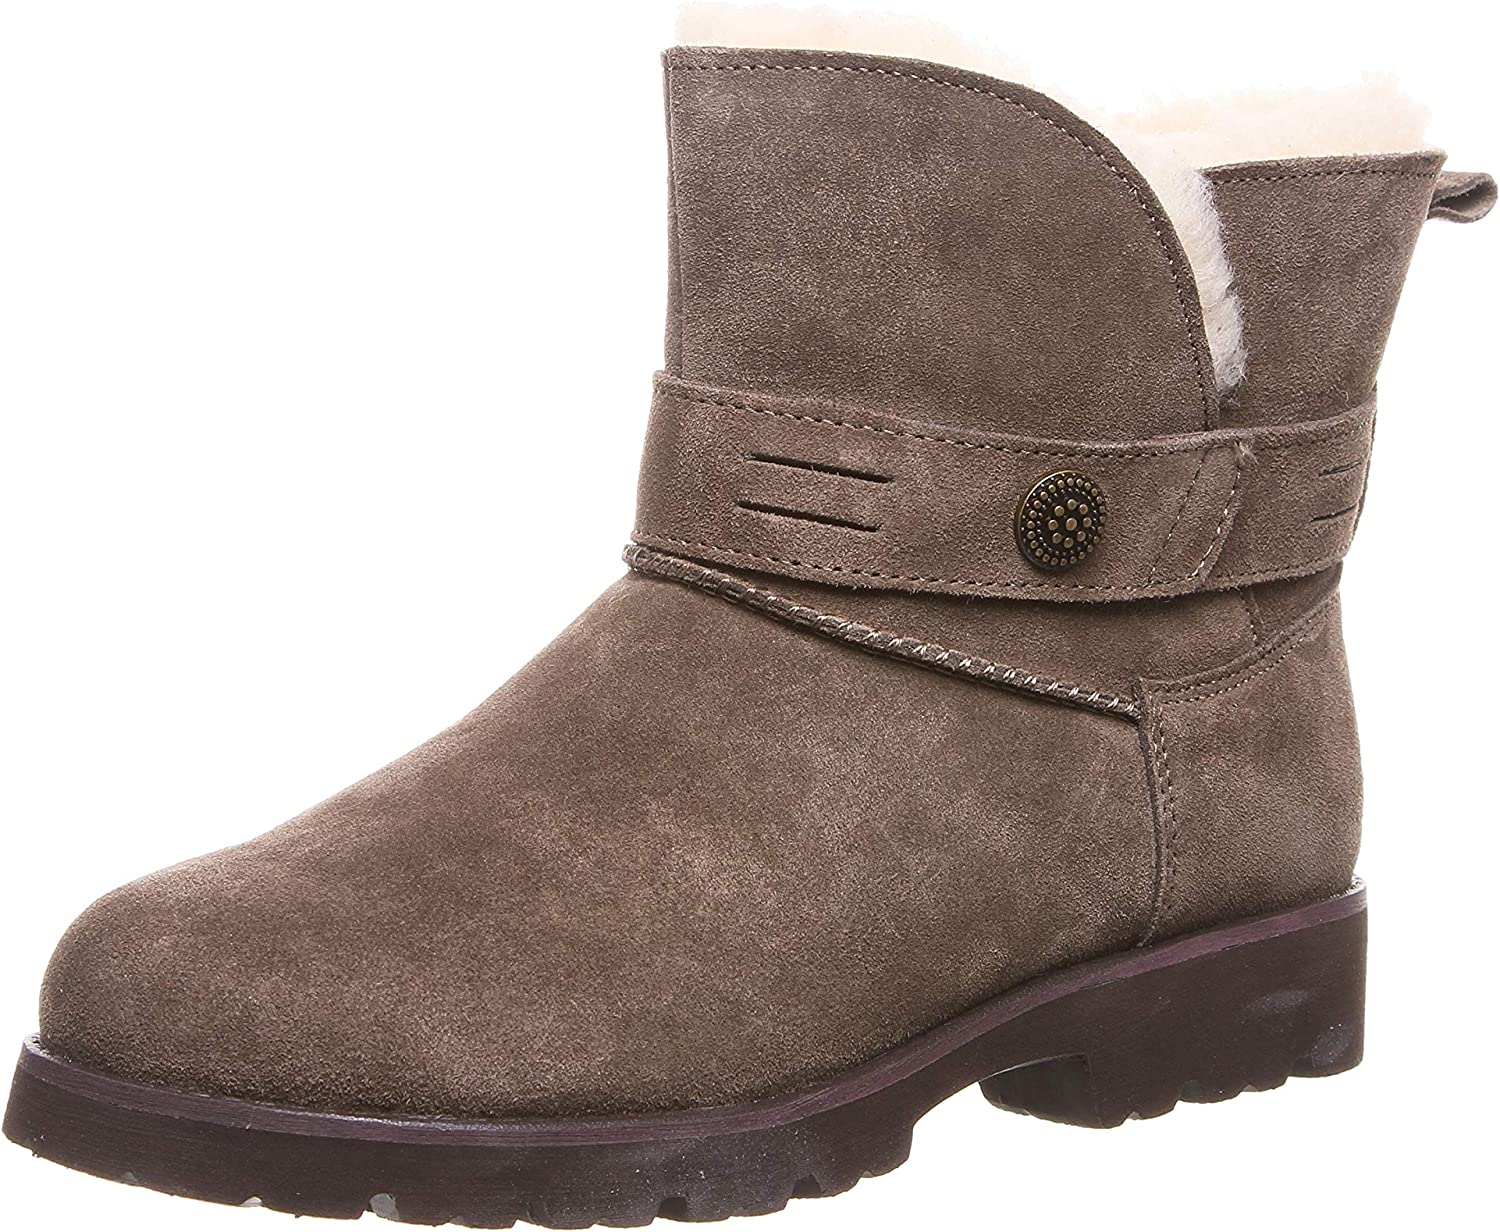 BEARPAW Womens Wellston Suede Slip On Ankle Boots - Seal Brown - 10